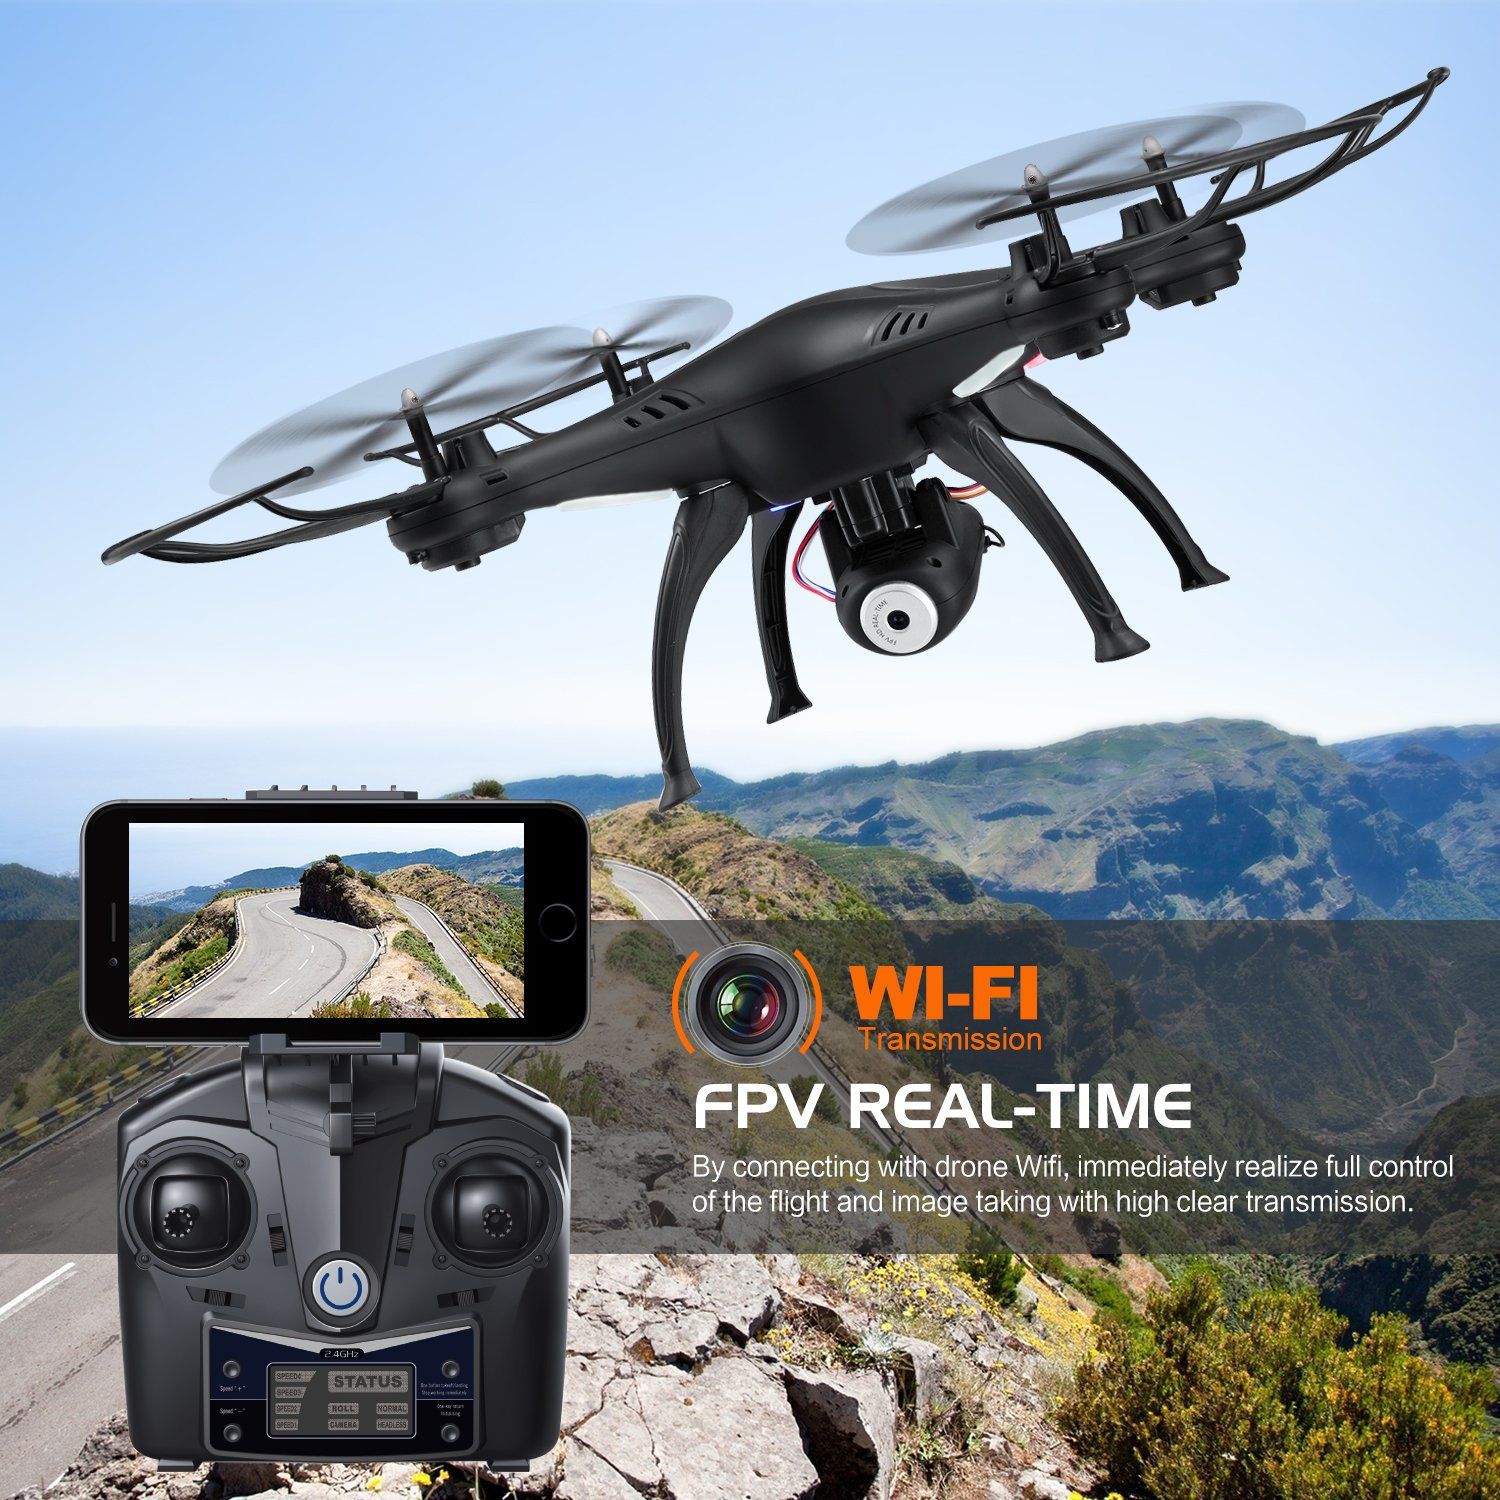 WiFi FPV Drone, Wireless 2.4Ghz RC Quadcopter RTF Altitude Hold with Newest Hover, 720P HD Camera ,3D Flips Function, One-Key Taking-off/Landing